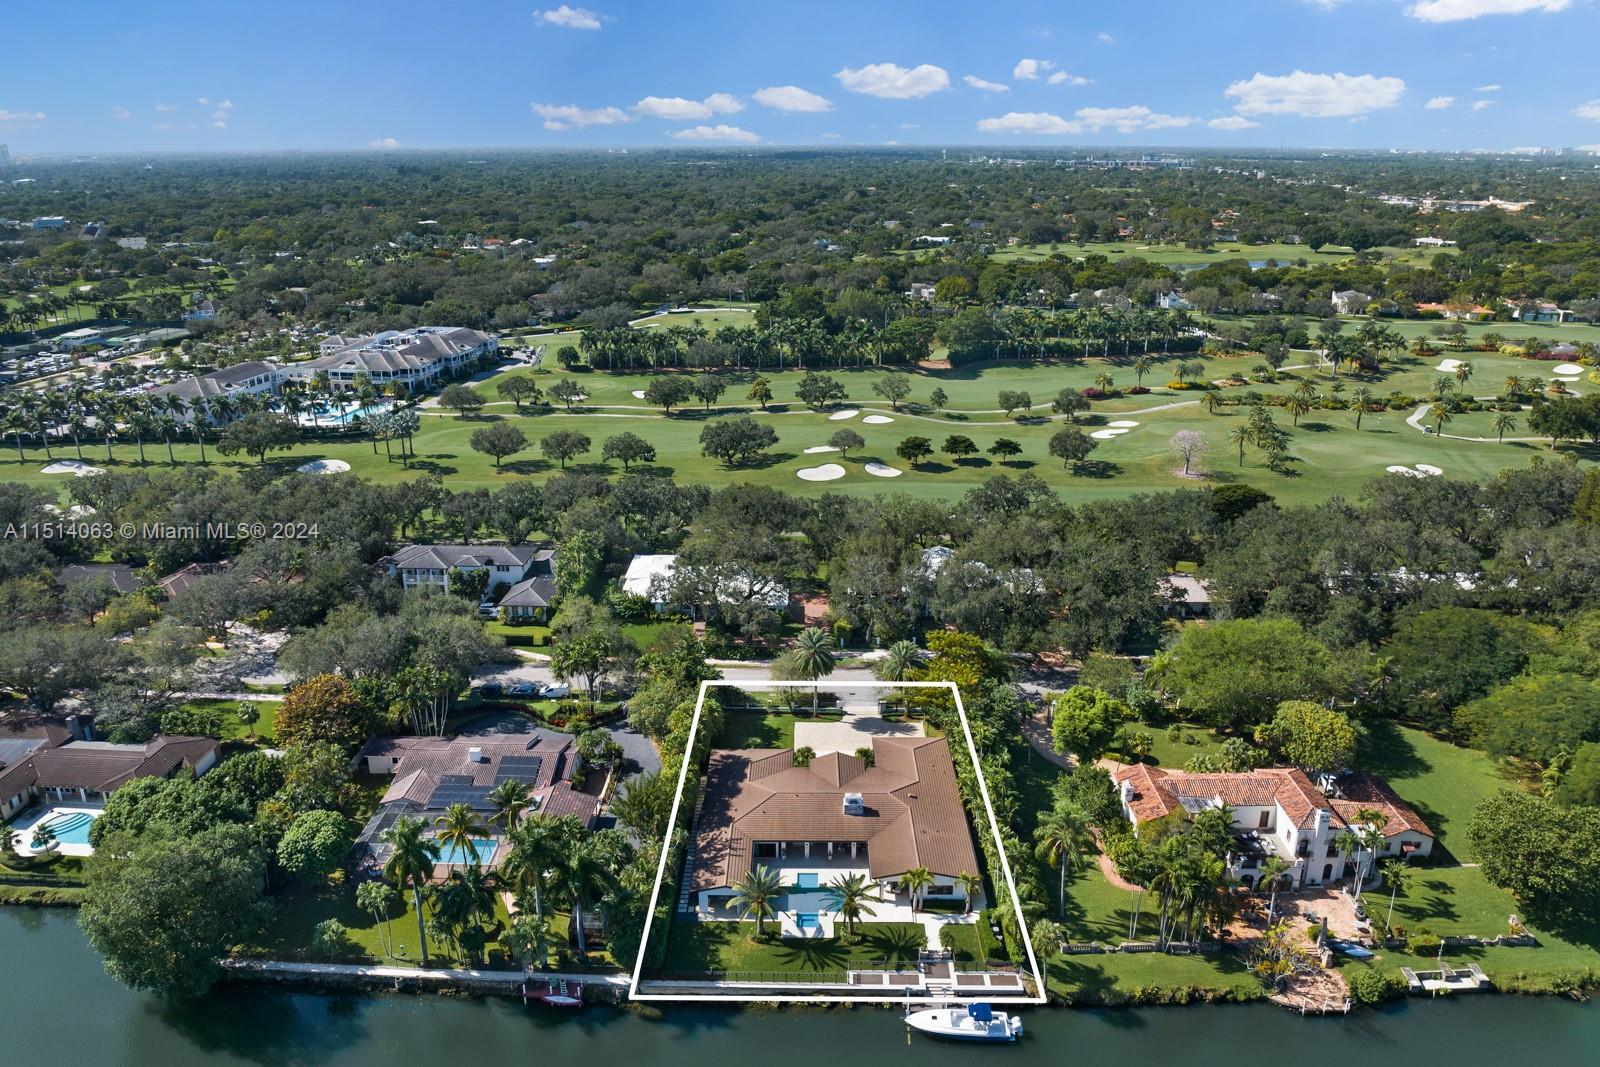 Extraordinary residence on the Coral Gables Waterway, featuring 6 bedrooms and 5.5 bathrooms on an expansive 24,292 SF lot with 125 FT of waterfront. Key features include vaulted ceilings, expansive outdoor terraces, 2-car garage, and gorgeous finishes.